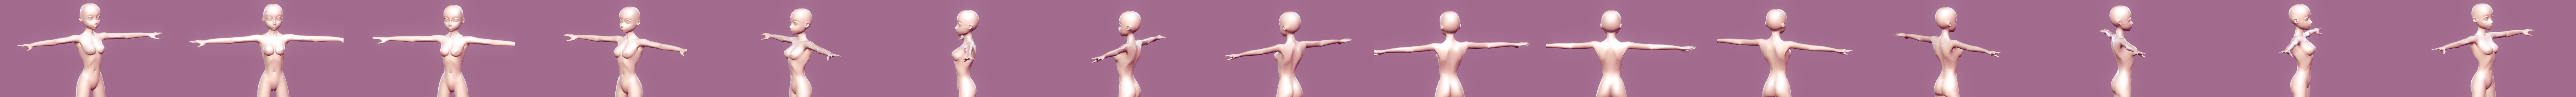 T pose rigged model of Saber - Buy Royalty Free 3D model by 3d Anime Girls  Collection (@3d.anime.girl) [ba71294]